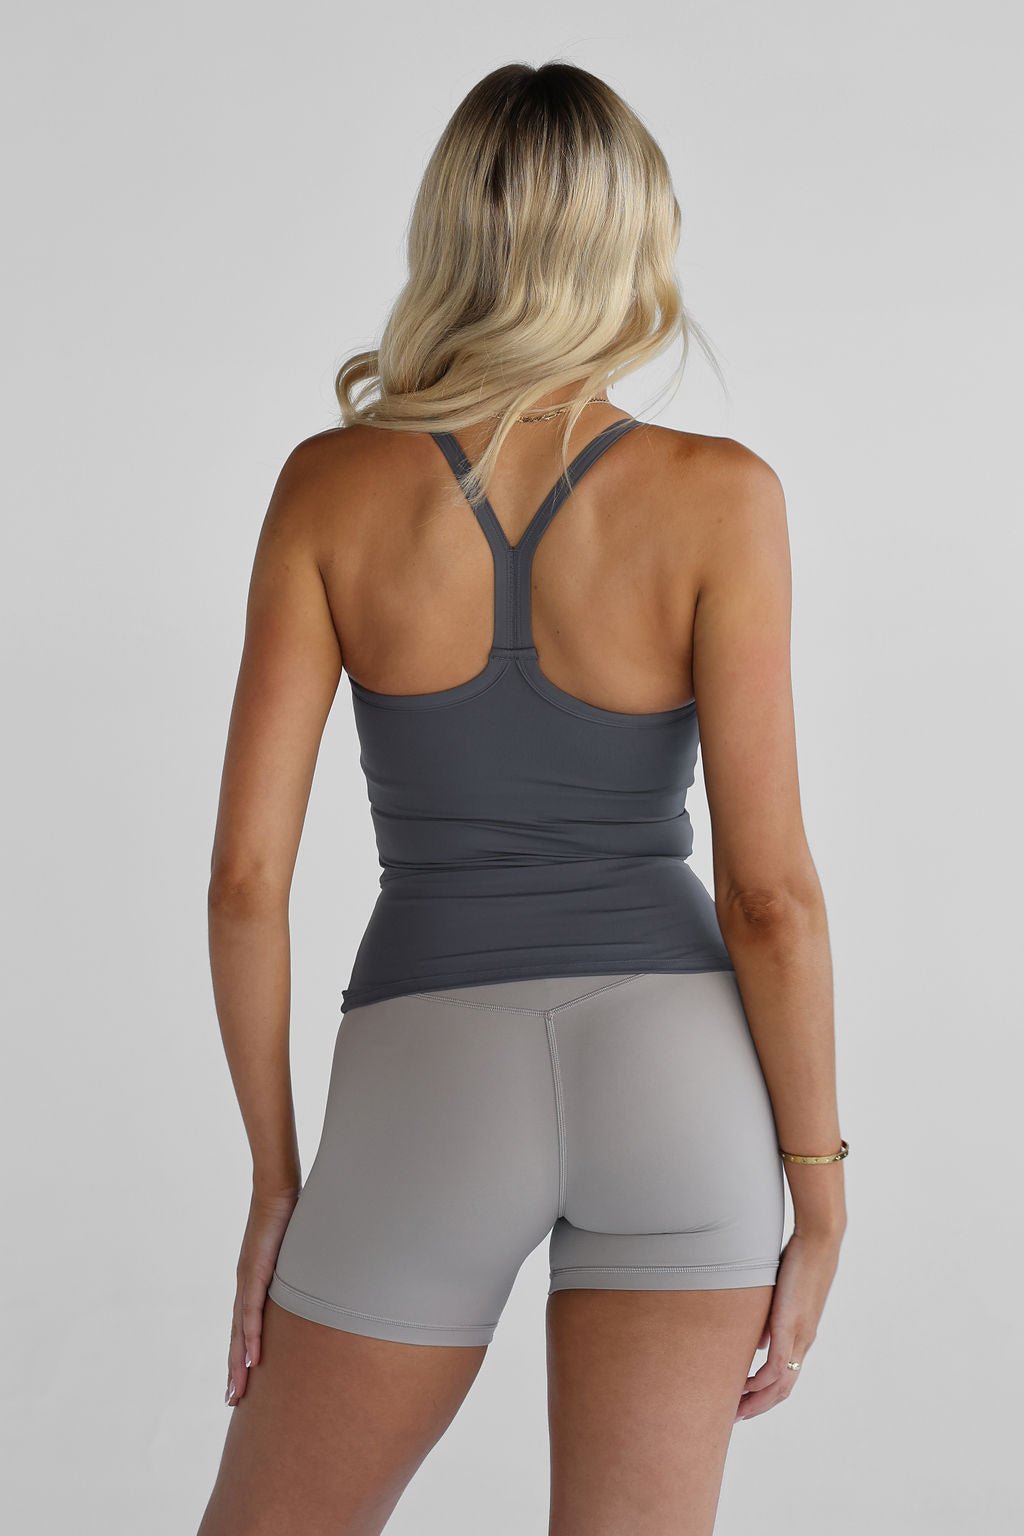 SCULPT Racer Back Tank - CHARCOAL, 5 Star Rated